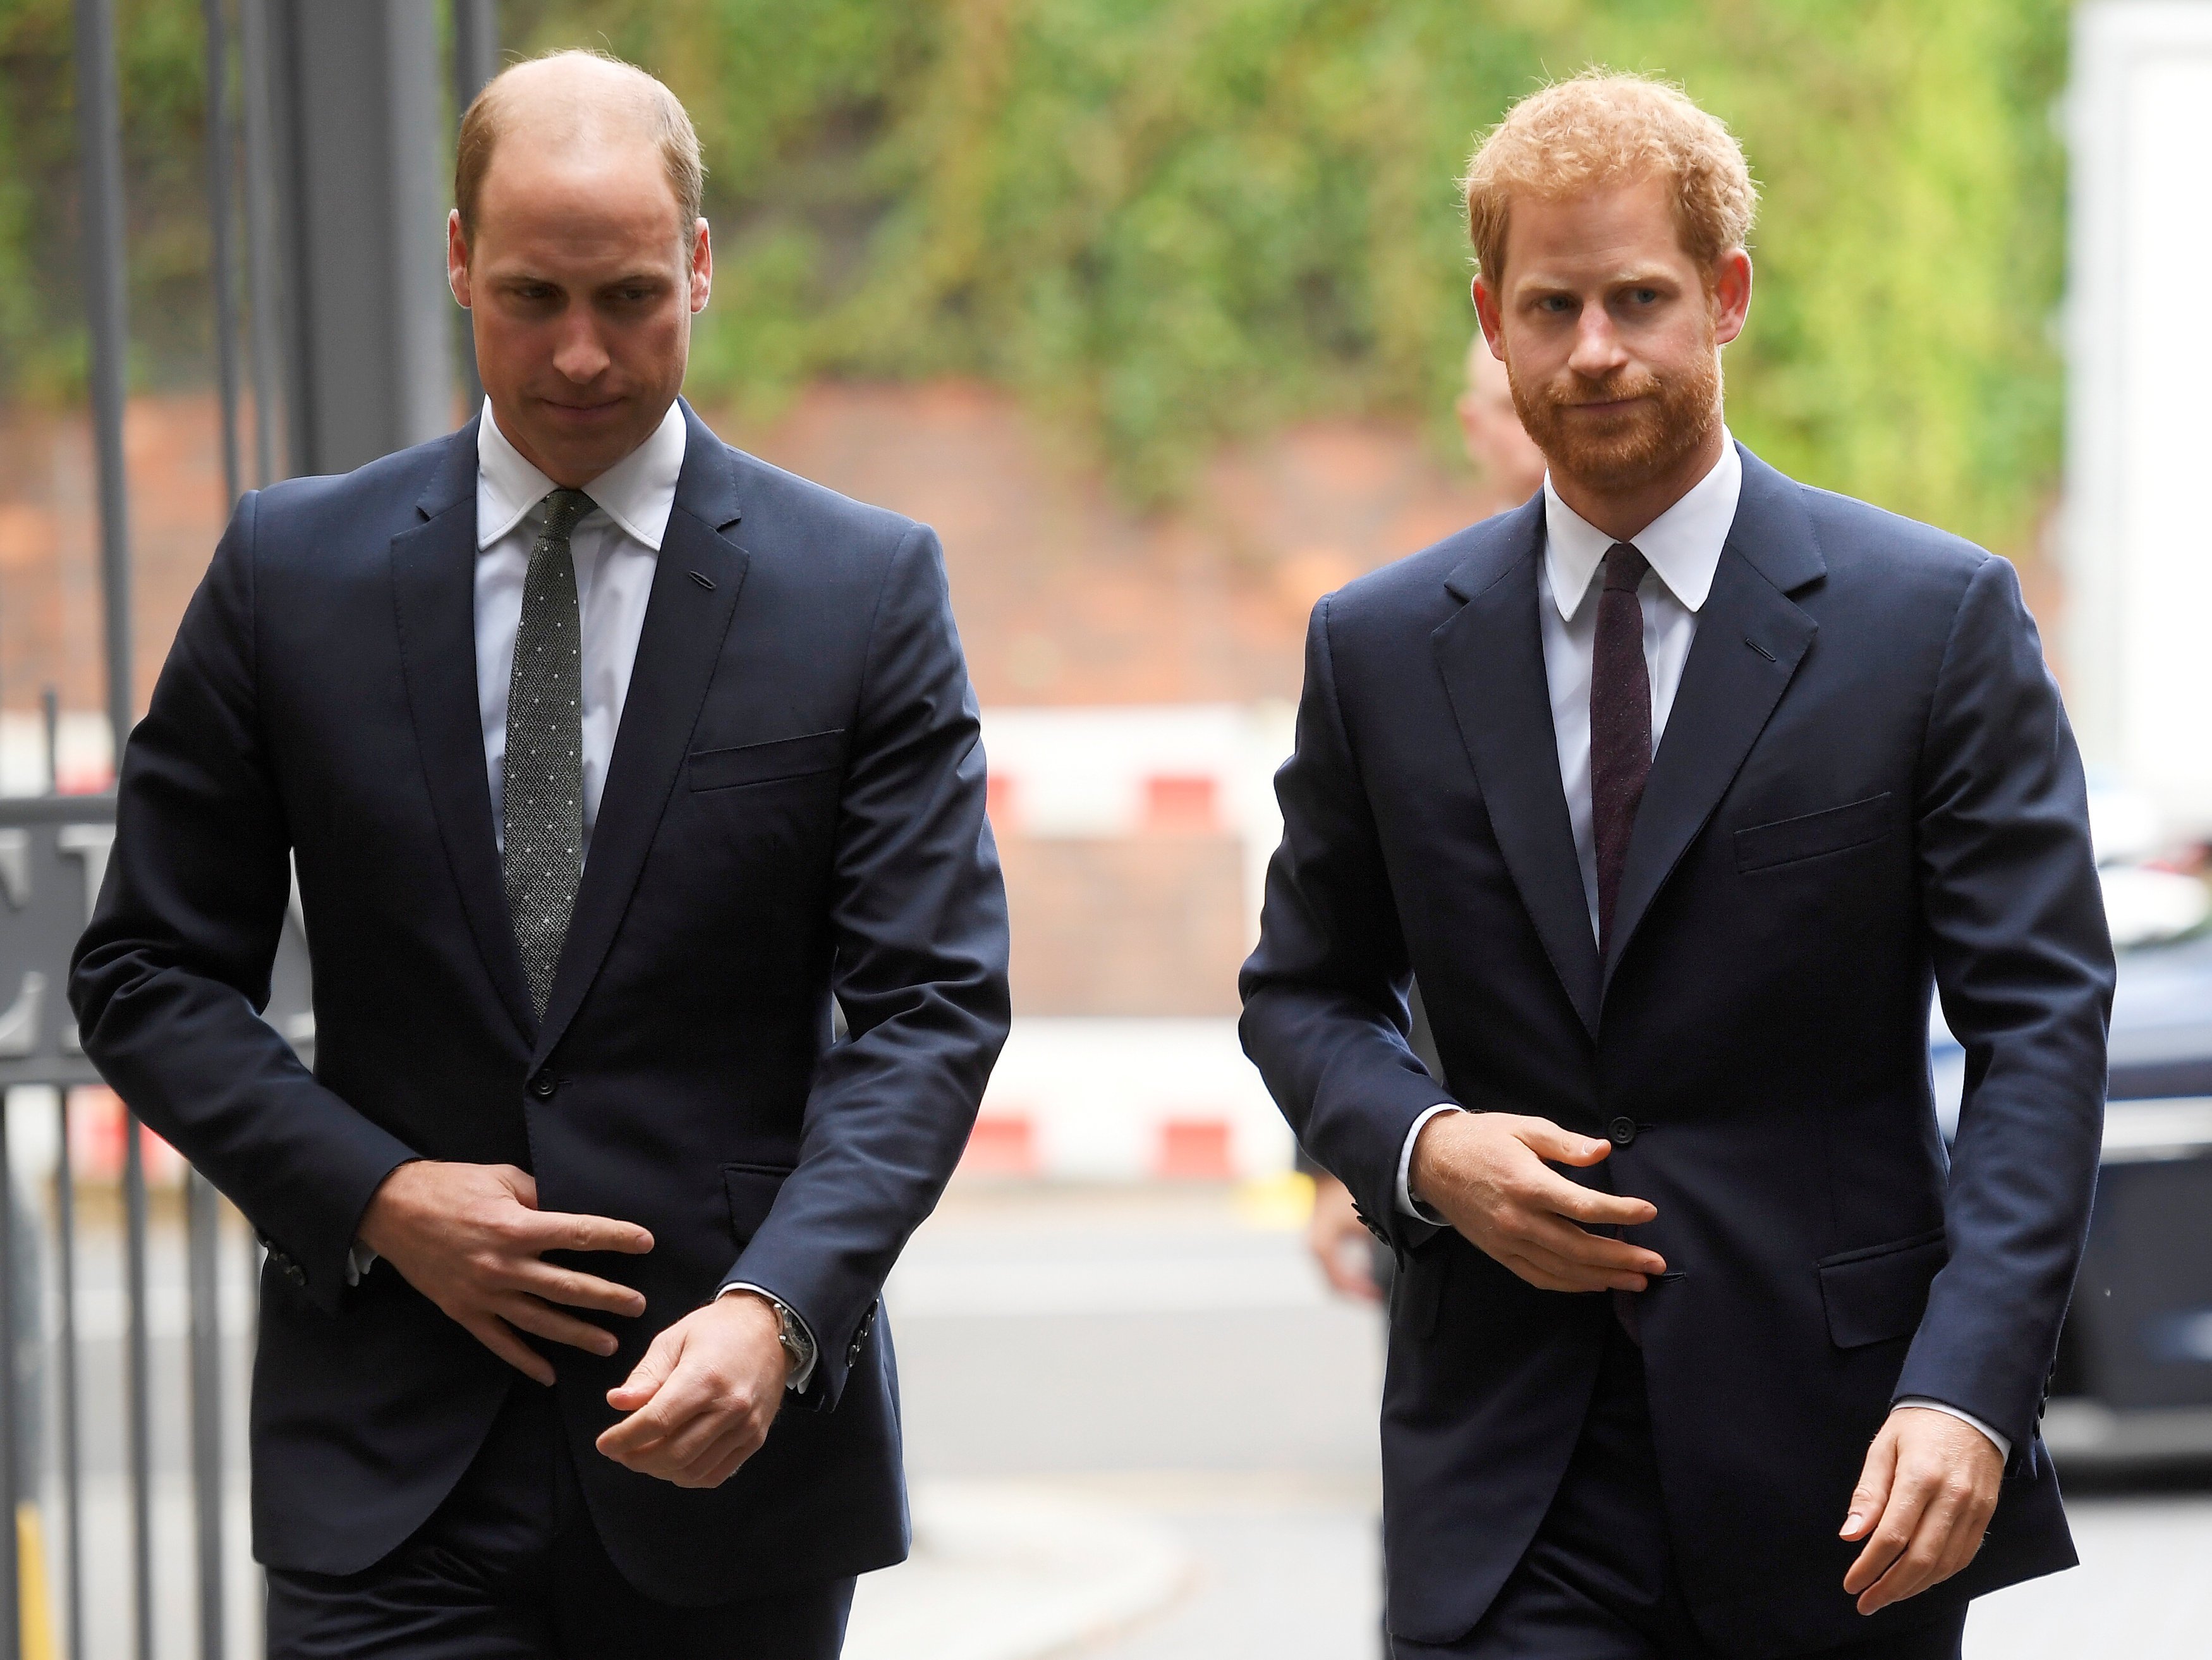 Prince William and Prince Harry arrive during a visit to the newly established Royal Foundation Support4Grenfell community hub on September 5, 2017 in London, England | Photo: Getty Images